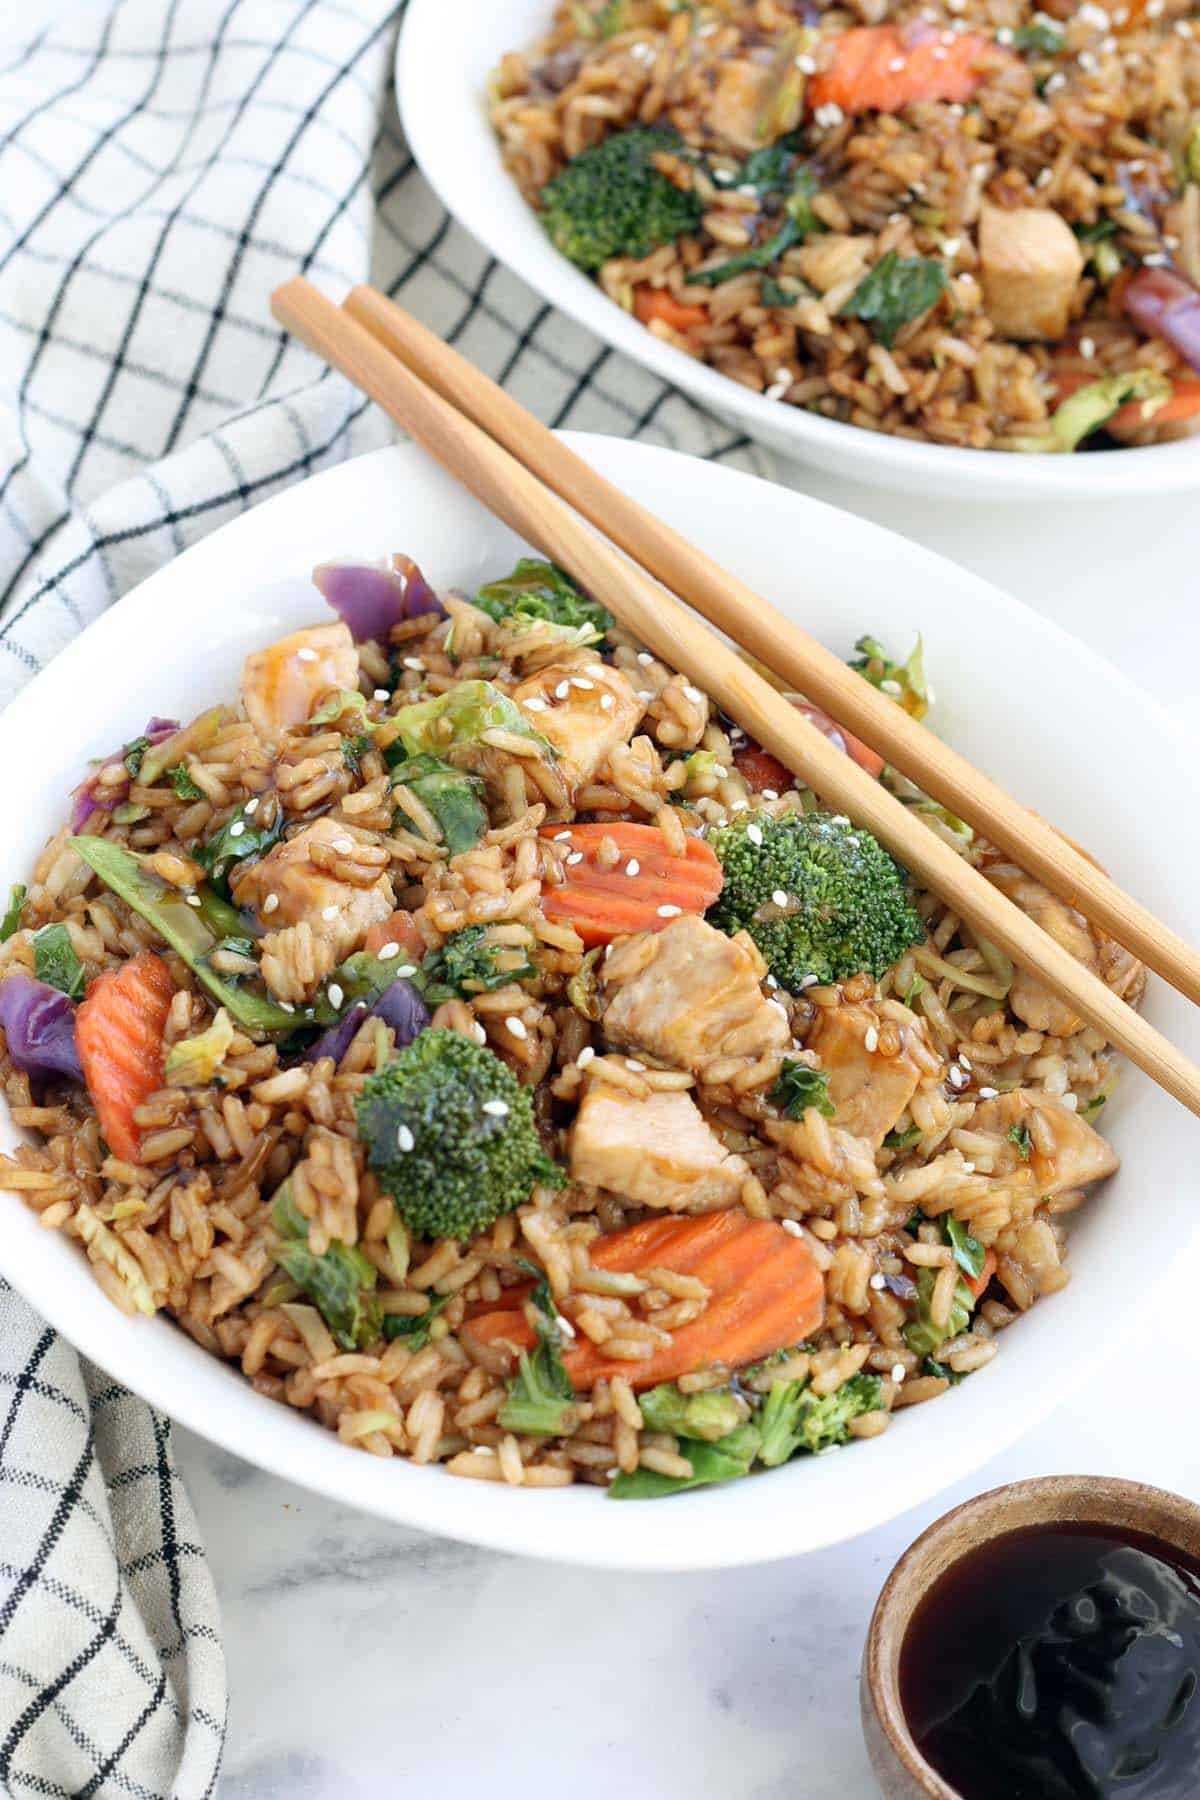 Teriyaki chicken with rice and wooden chopsticks in a white bowl